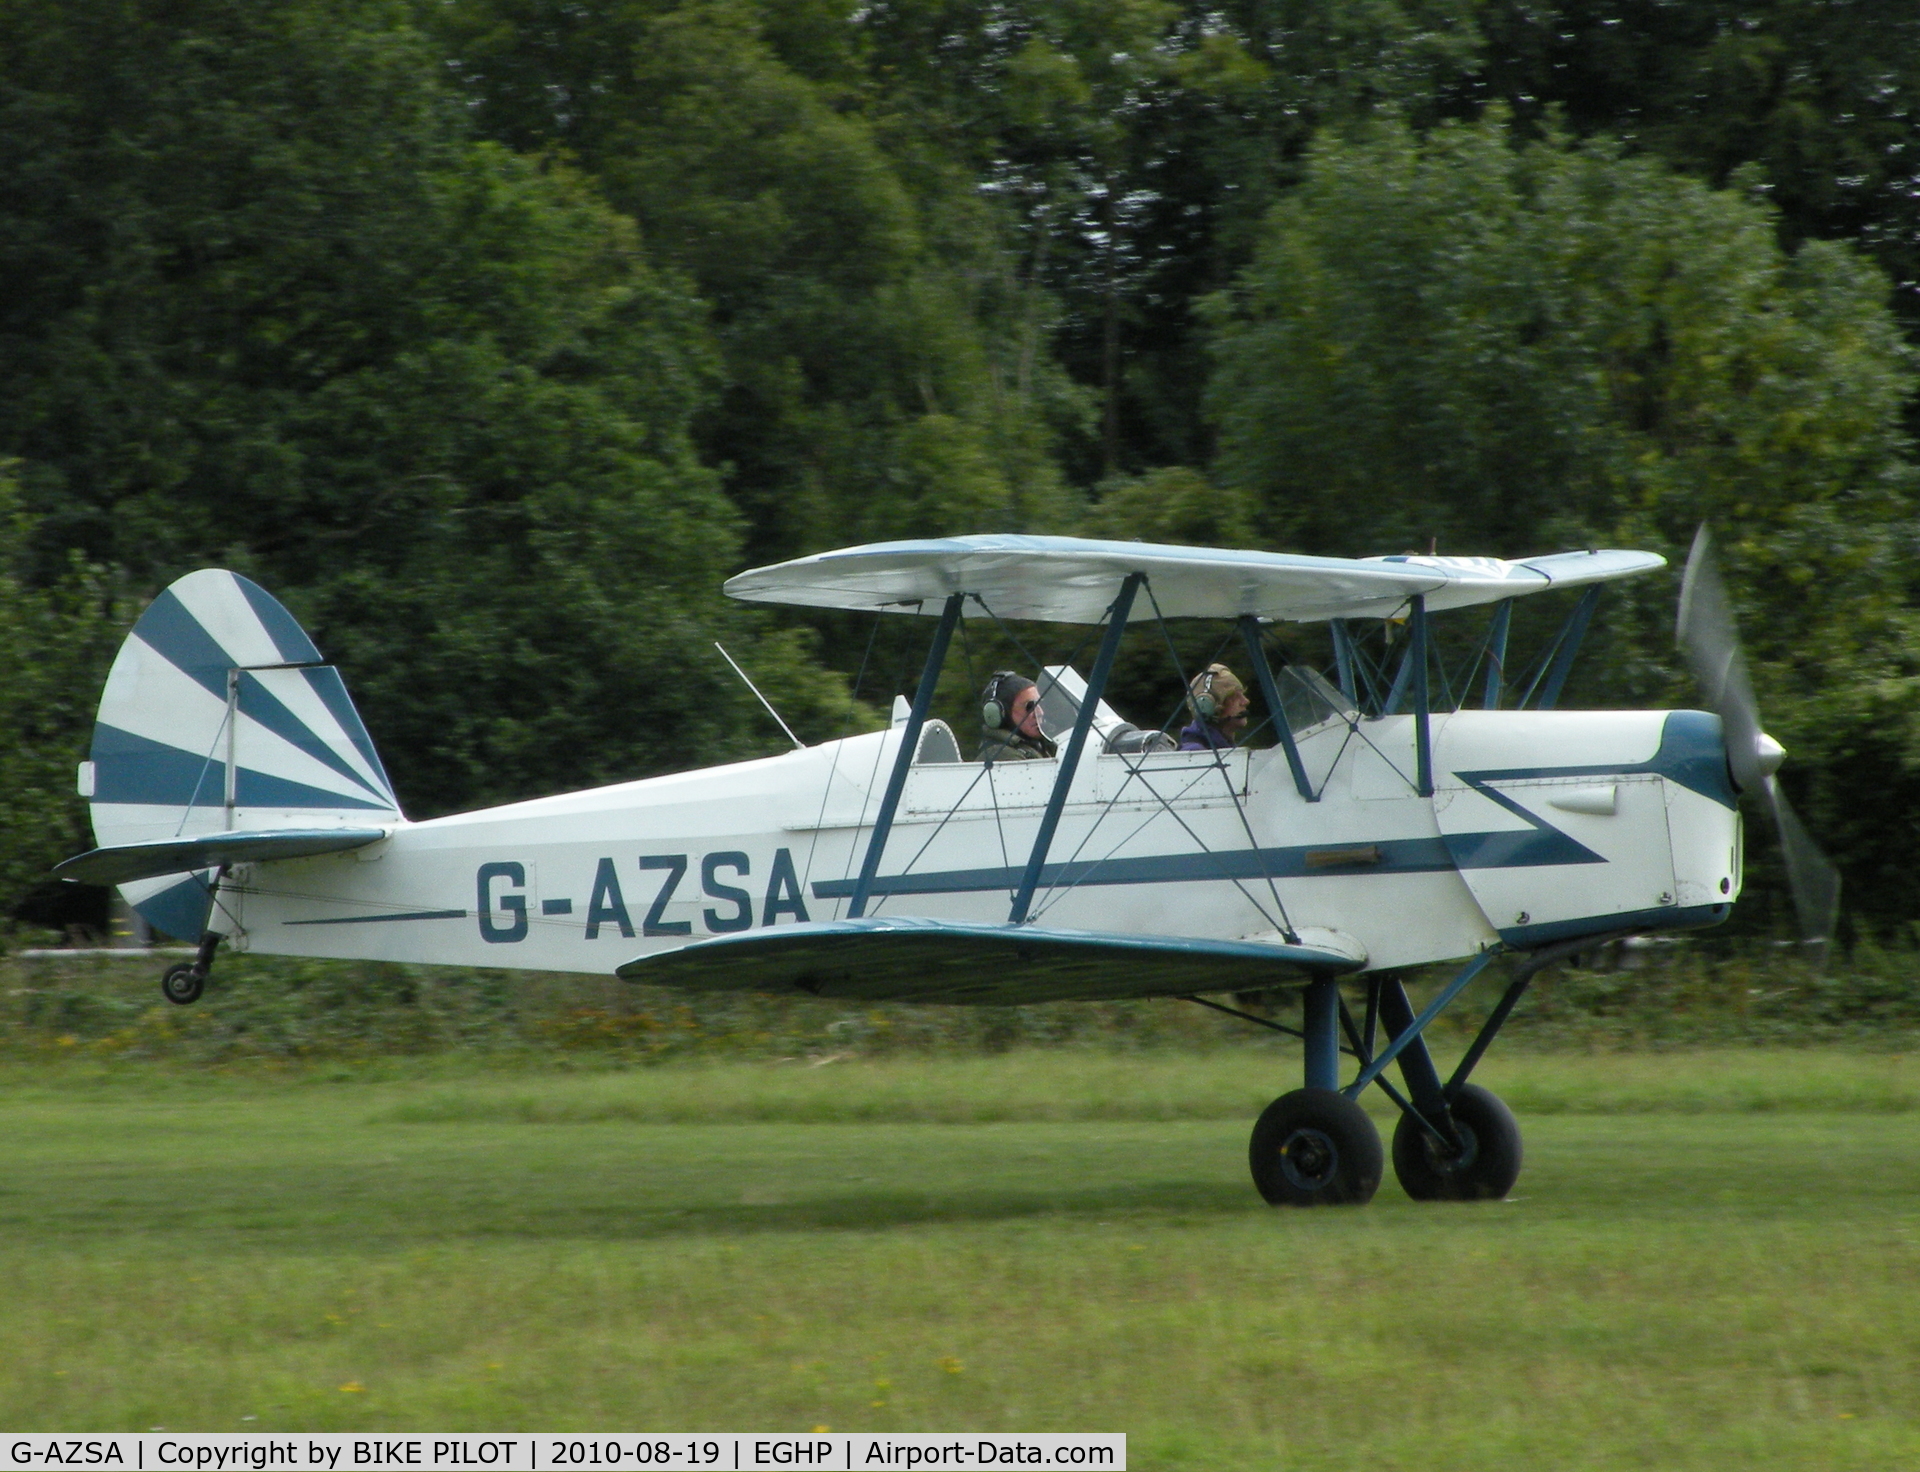 G-AZSA, 1962 Stampe-Vertongen SV-4B C/N 64, Nice Stampe getting the tail up rwy 26. Starlight Foundation Day.